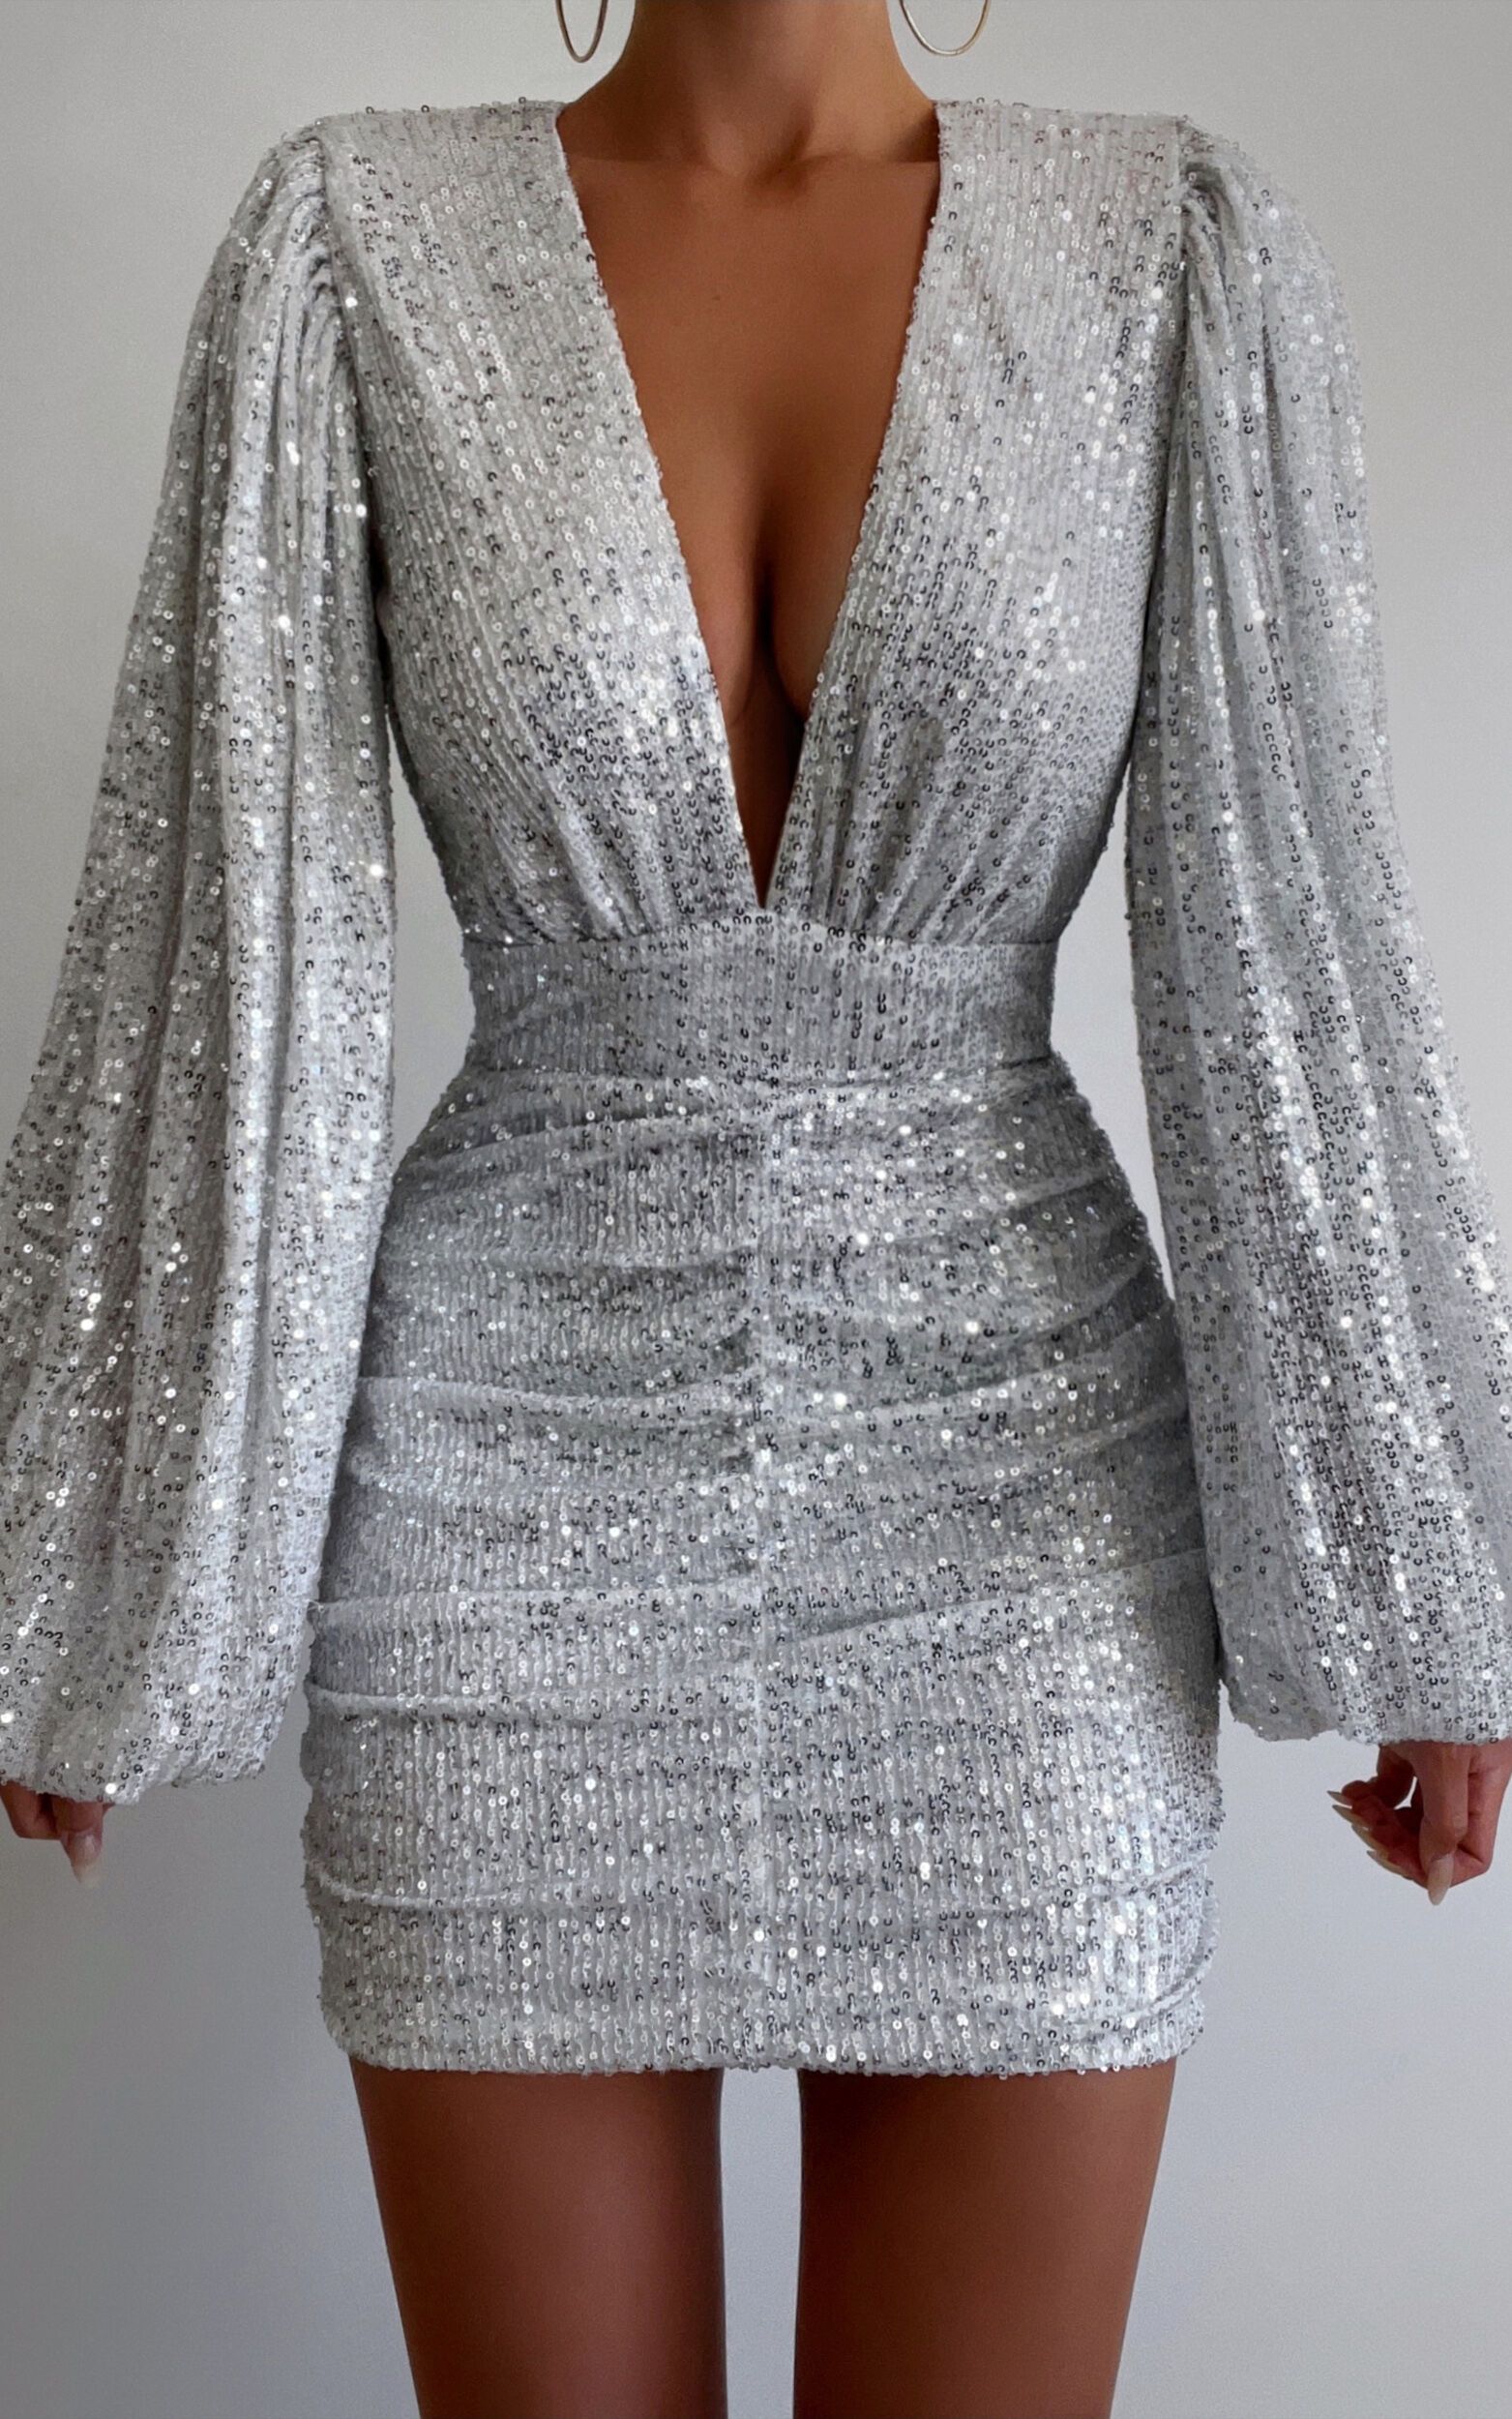 Elegant Charm: Silver Dress for Special Occasions